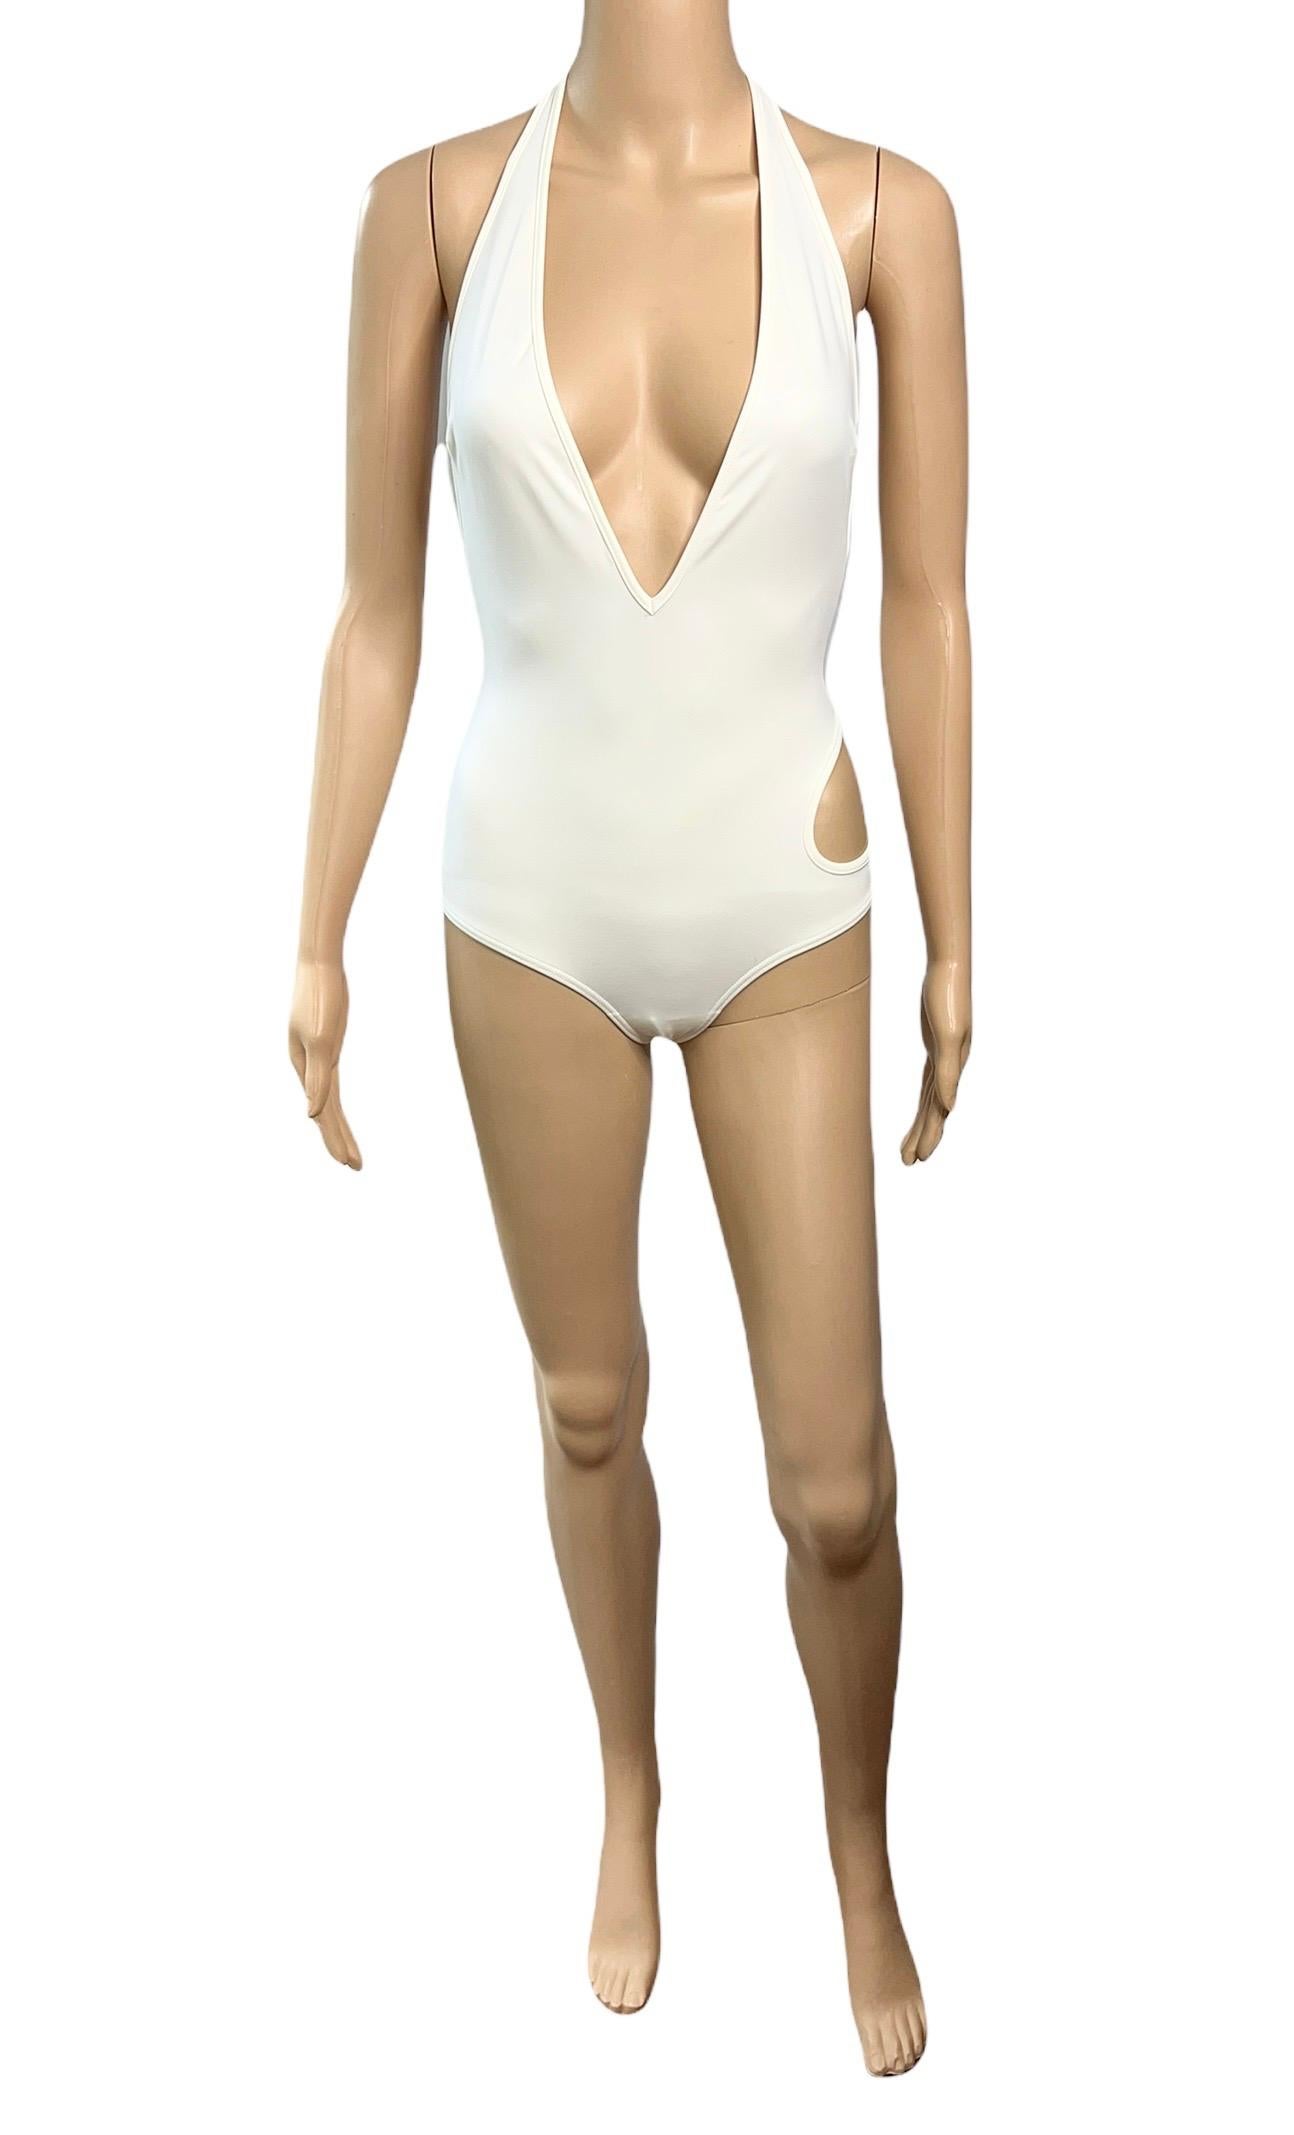 Tom Ford for Gucci F/W 1996 Cutout Backless White Bodysuit Swimsuit Swimwear Size M


